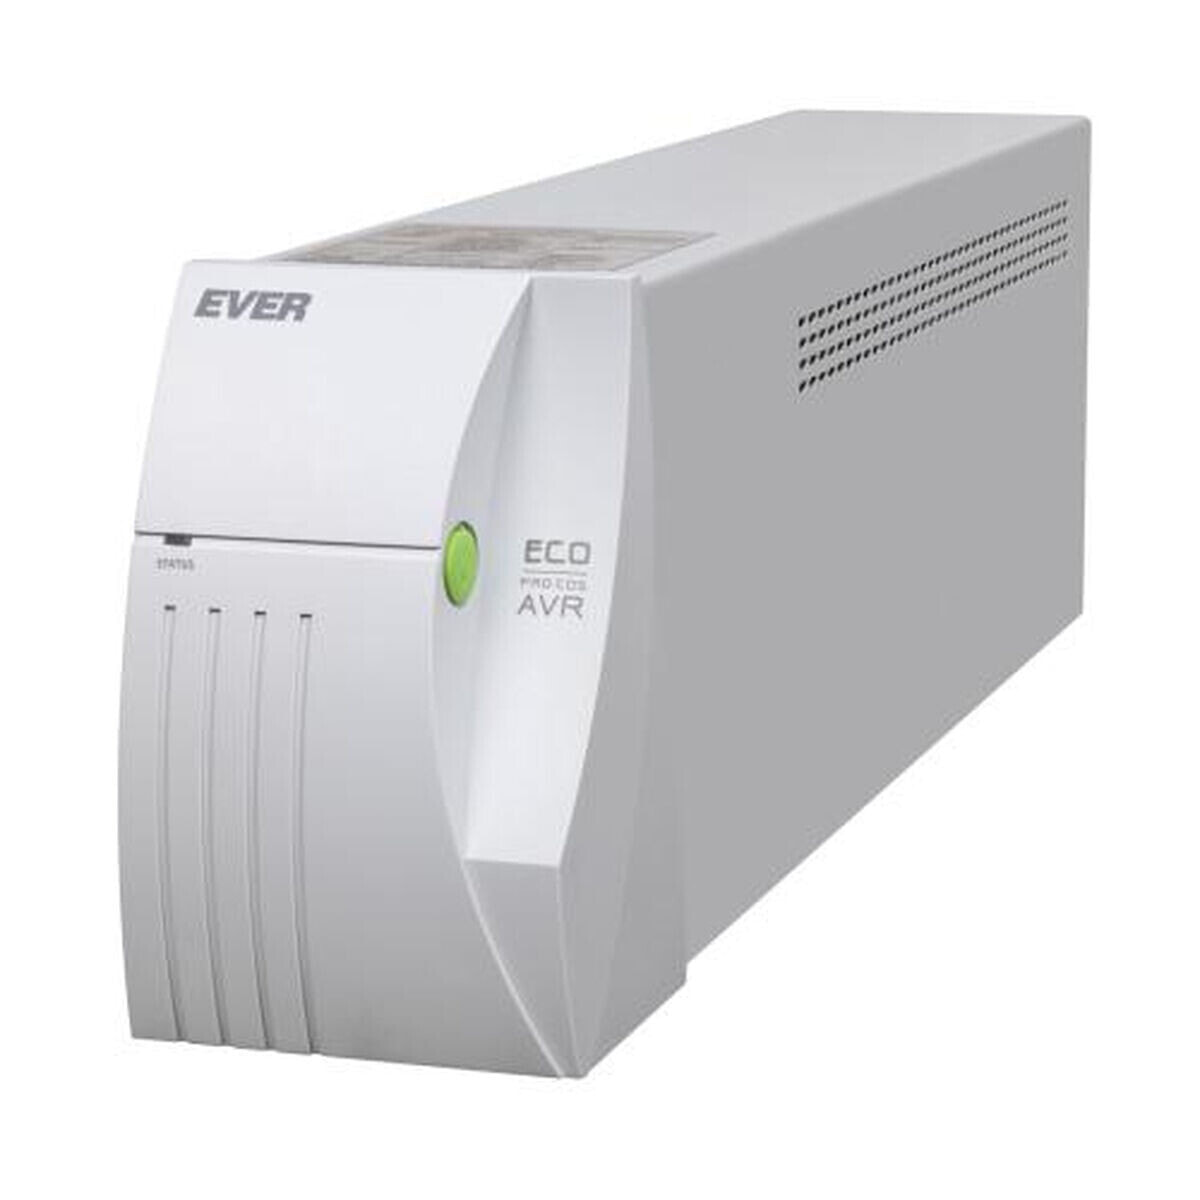 Uninterruptible Power Supply System Interactive UPS Ever ECO PRO 1000 AVR CDS 650 W